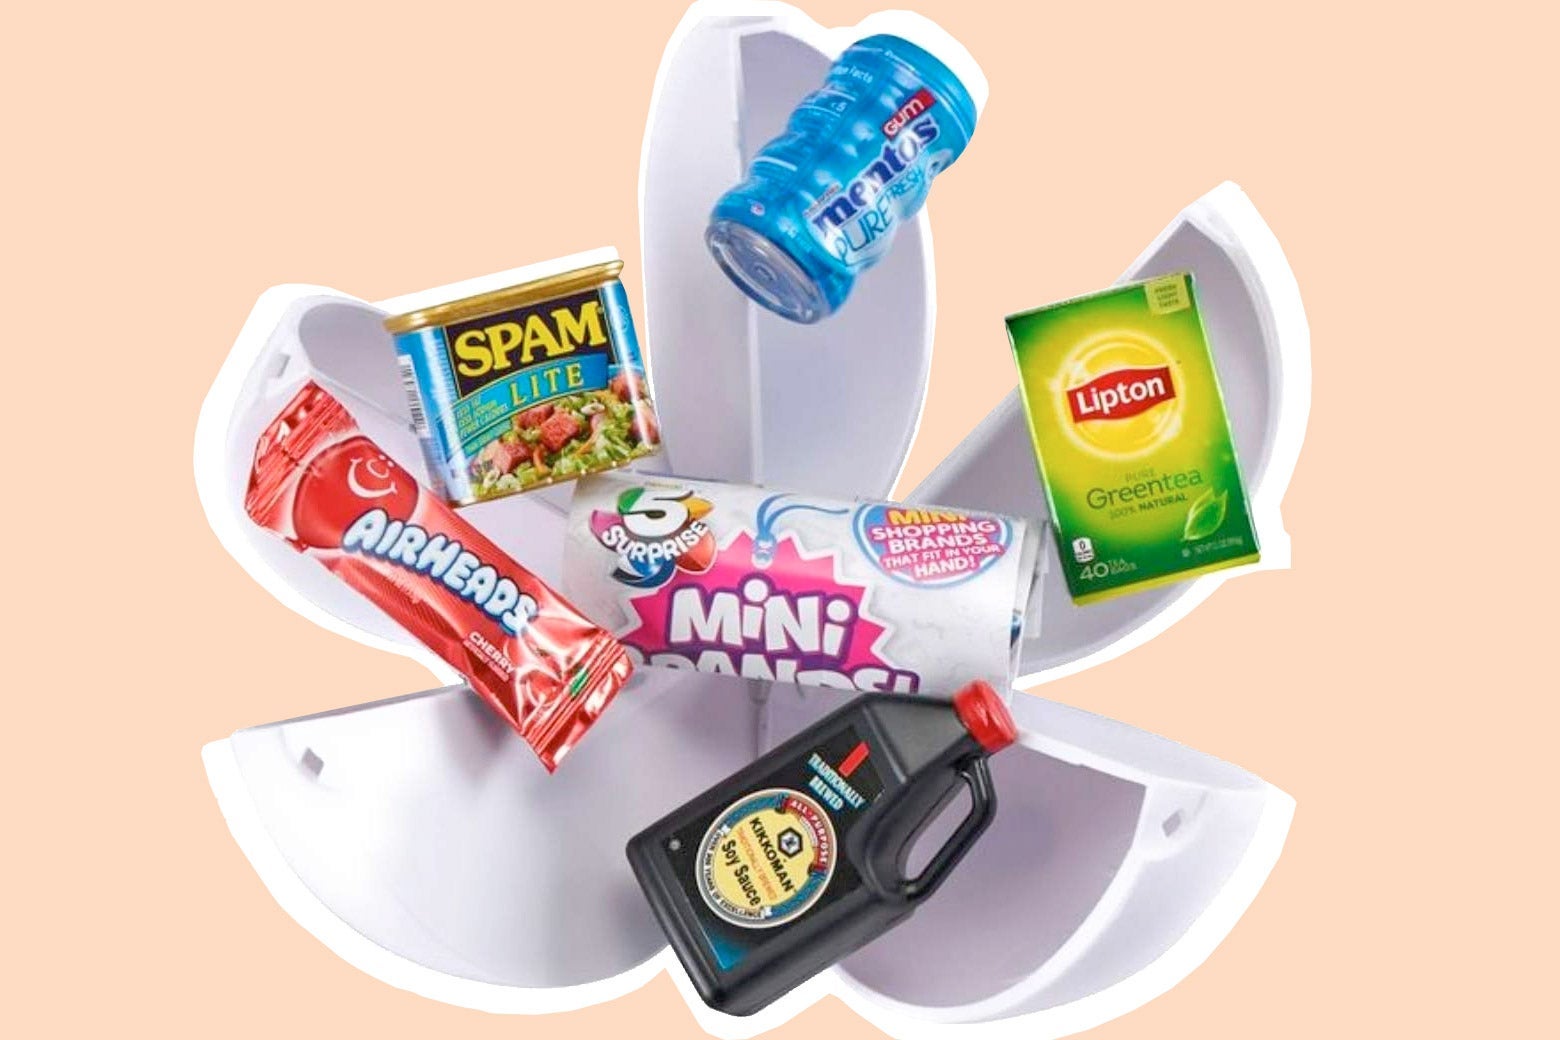 Five-segment spherical capsule bursting open with mini versions of a Mentos container, a Lipton tea box, a Kikkoman soy sauce bottle, an AirHeads package, and a Spam Lite can, with the 5 Surprise Mini Brands logo in the center